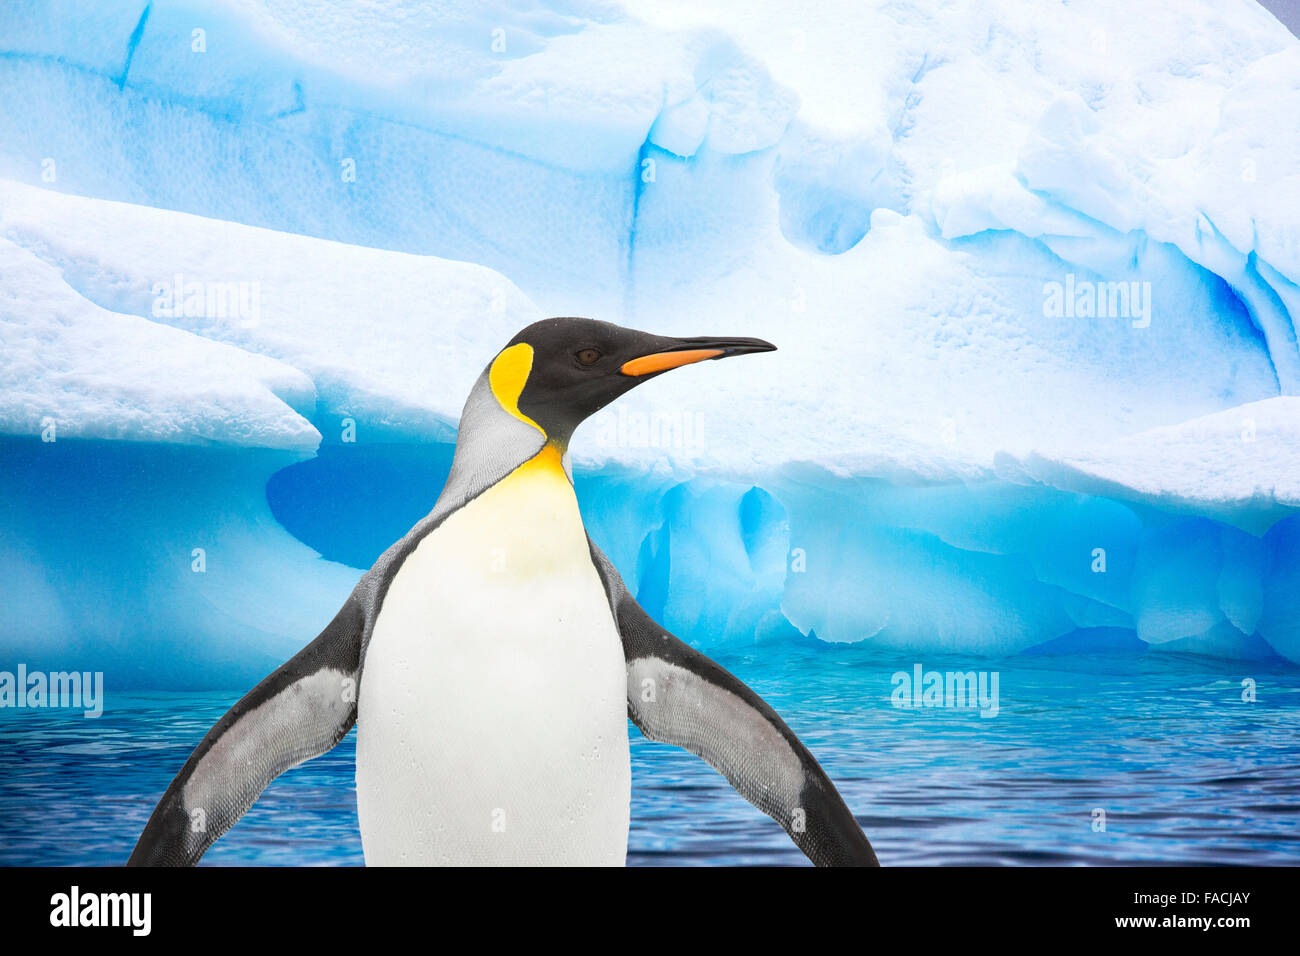 A King Penguin and an iceberg. Stock Photo